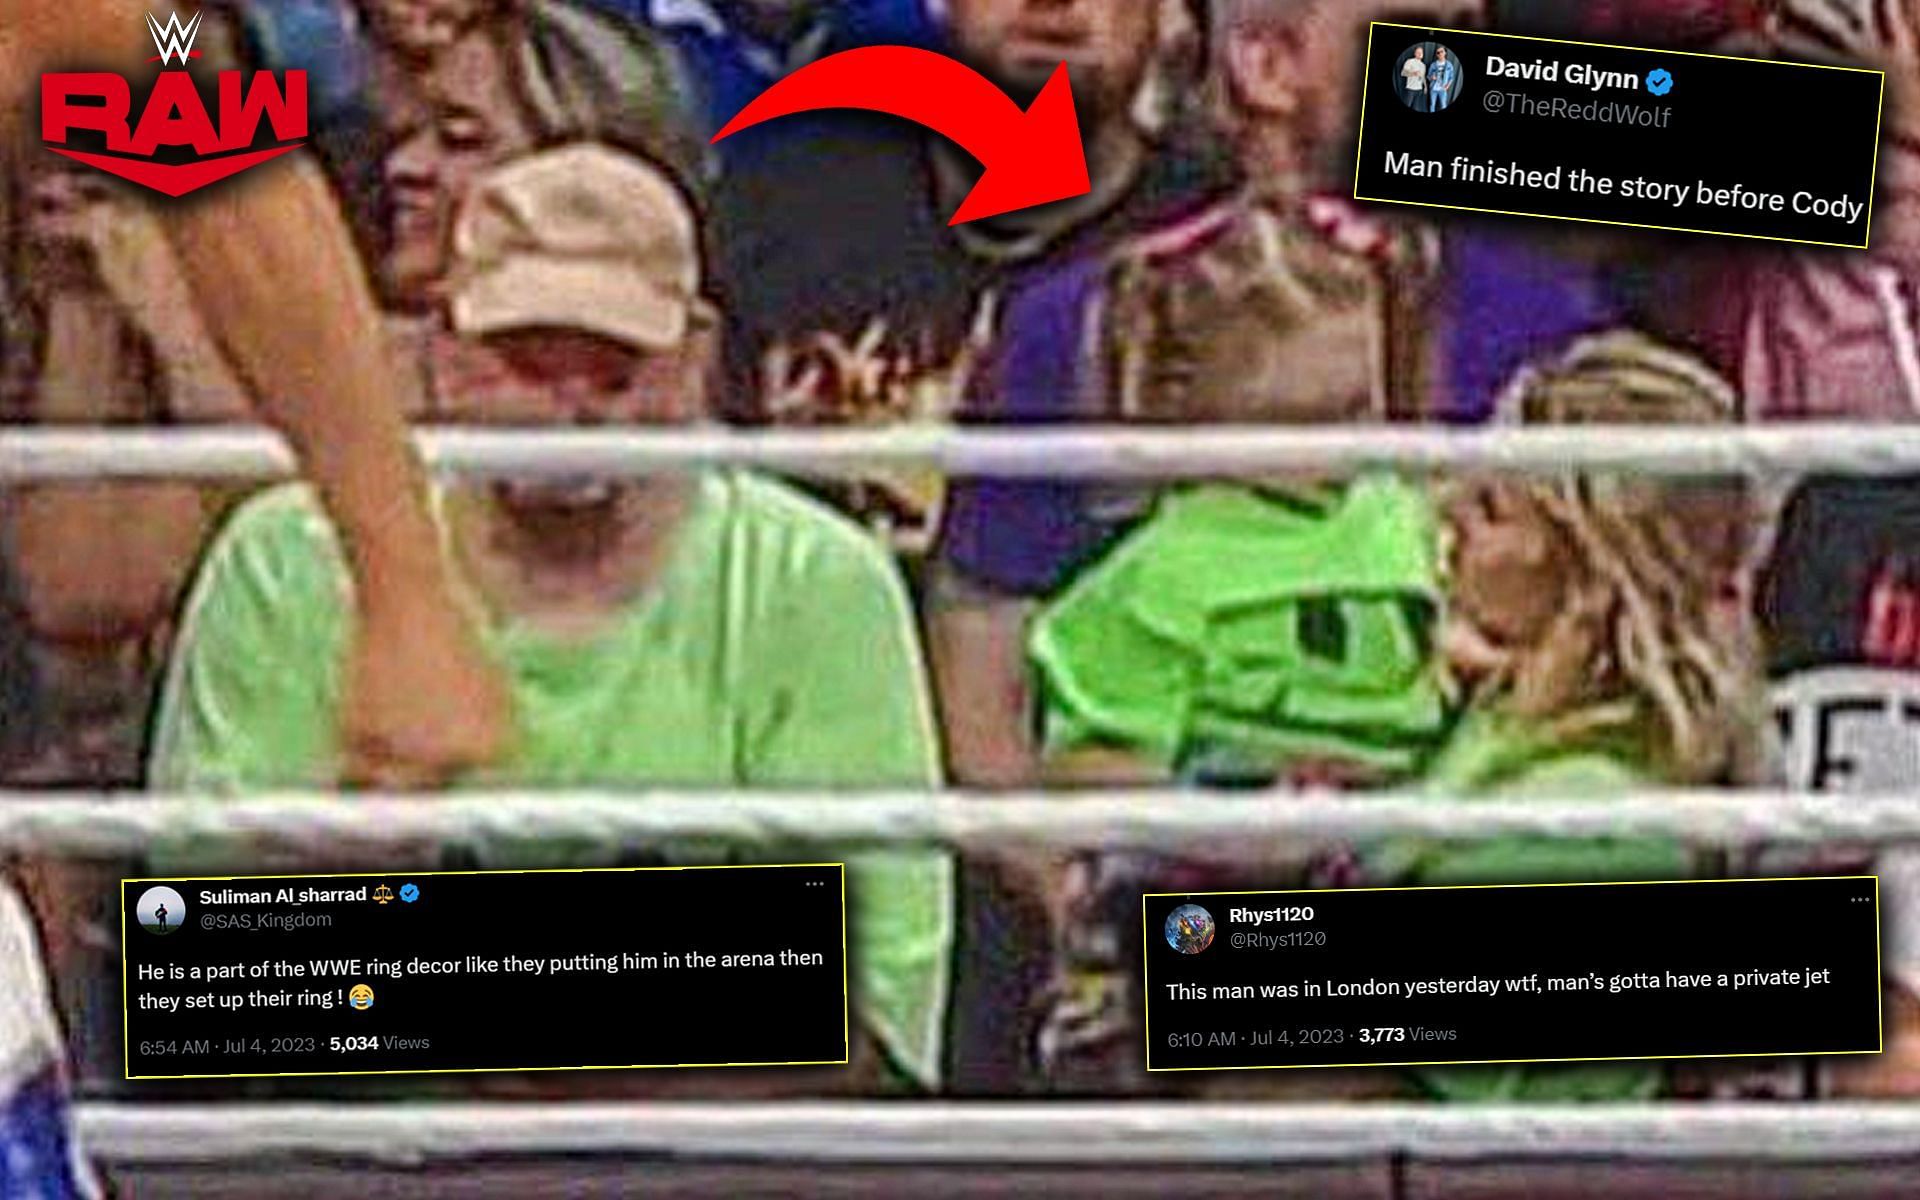 Superfan Smilez is famously known as green shirt guy